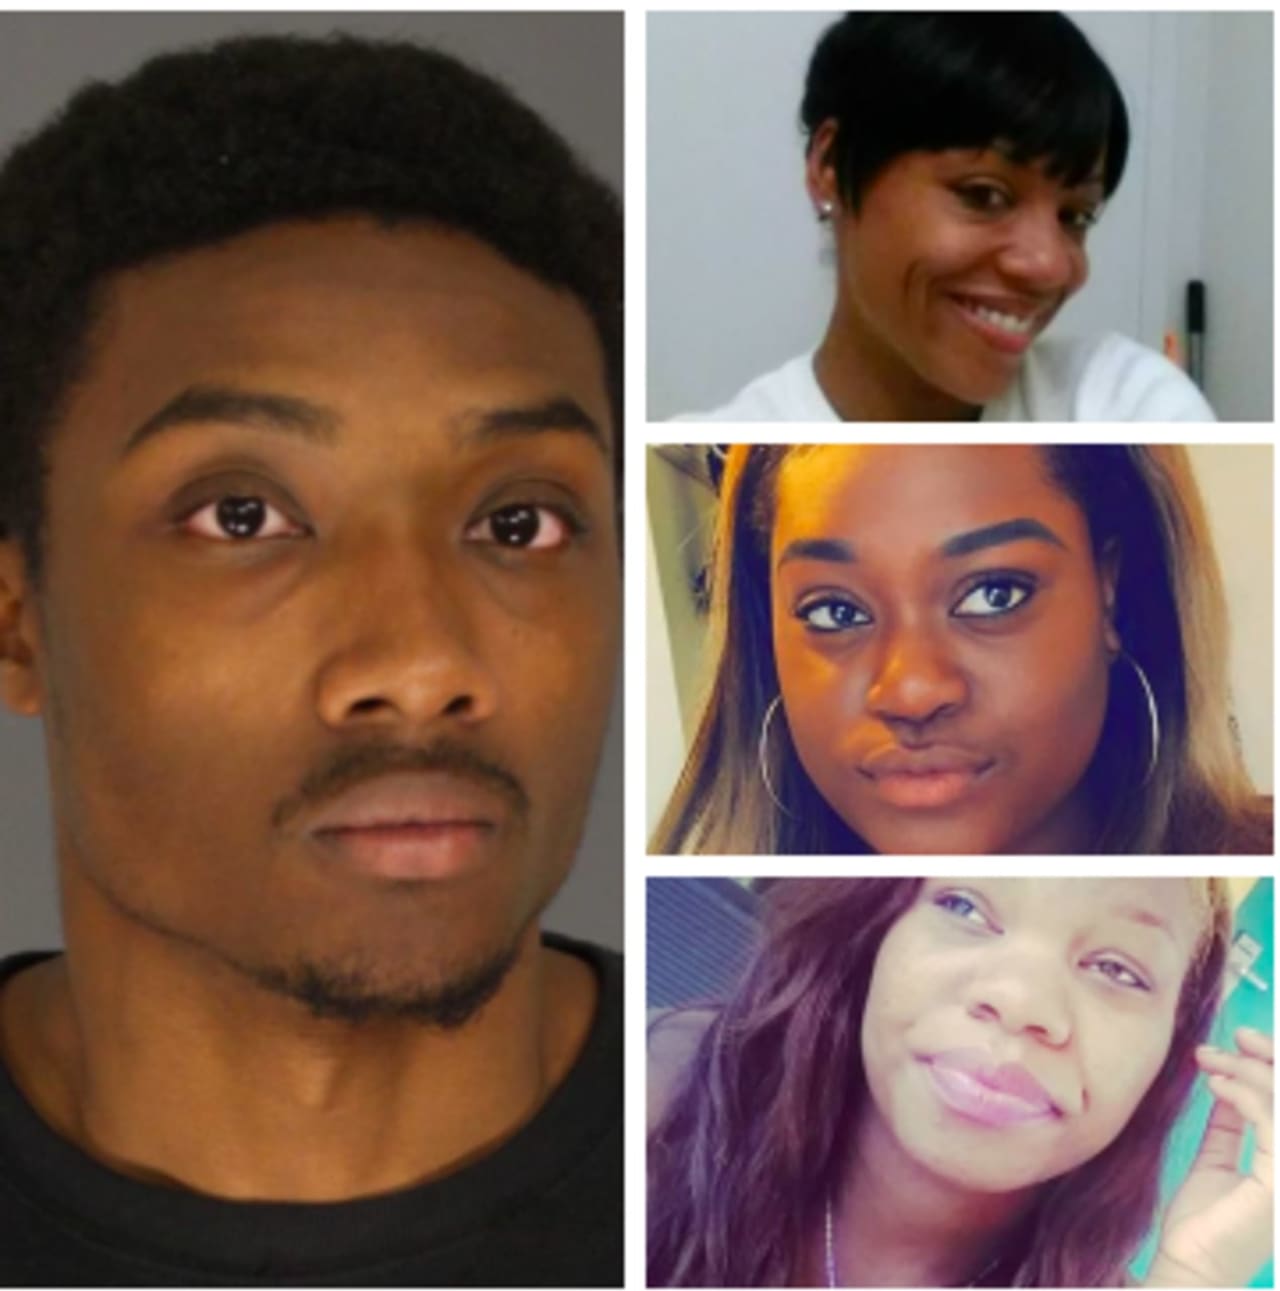 Khalil Wheeler-Weaver will spend the rest of his life in prison for the killings of Joanne Brown, Sarah Butler and Robin West.